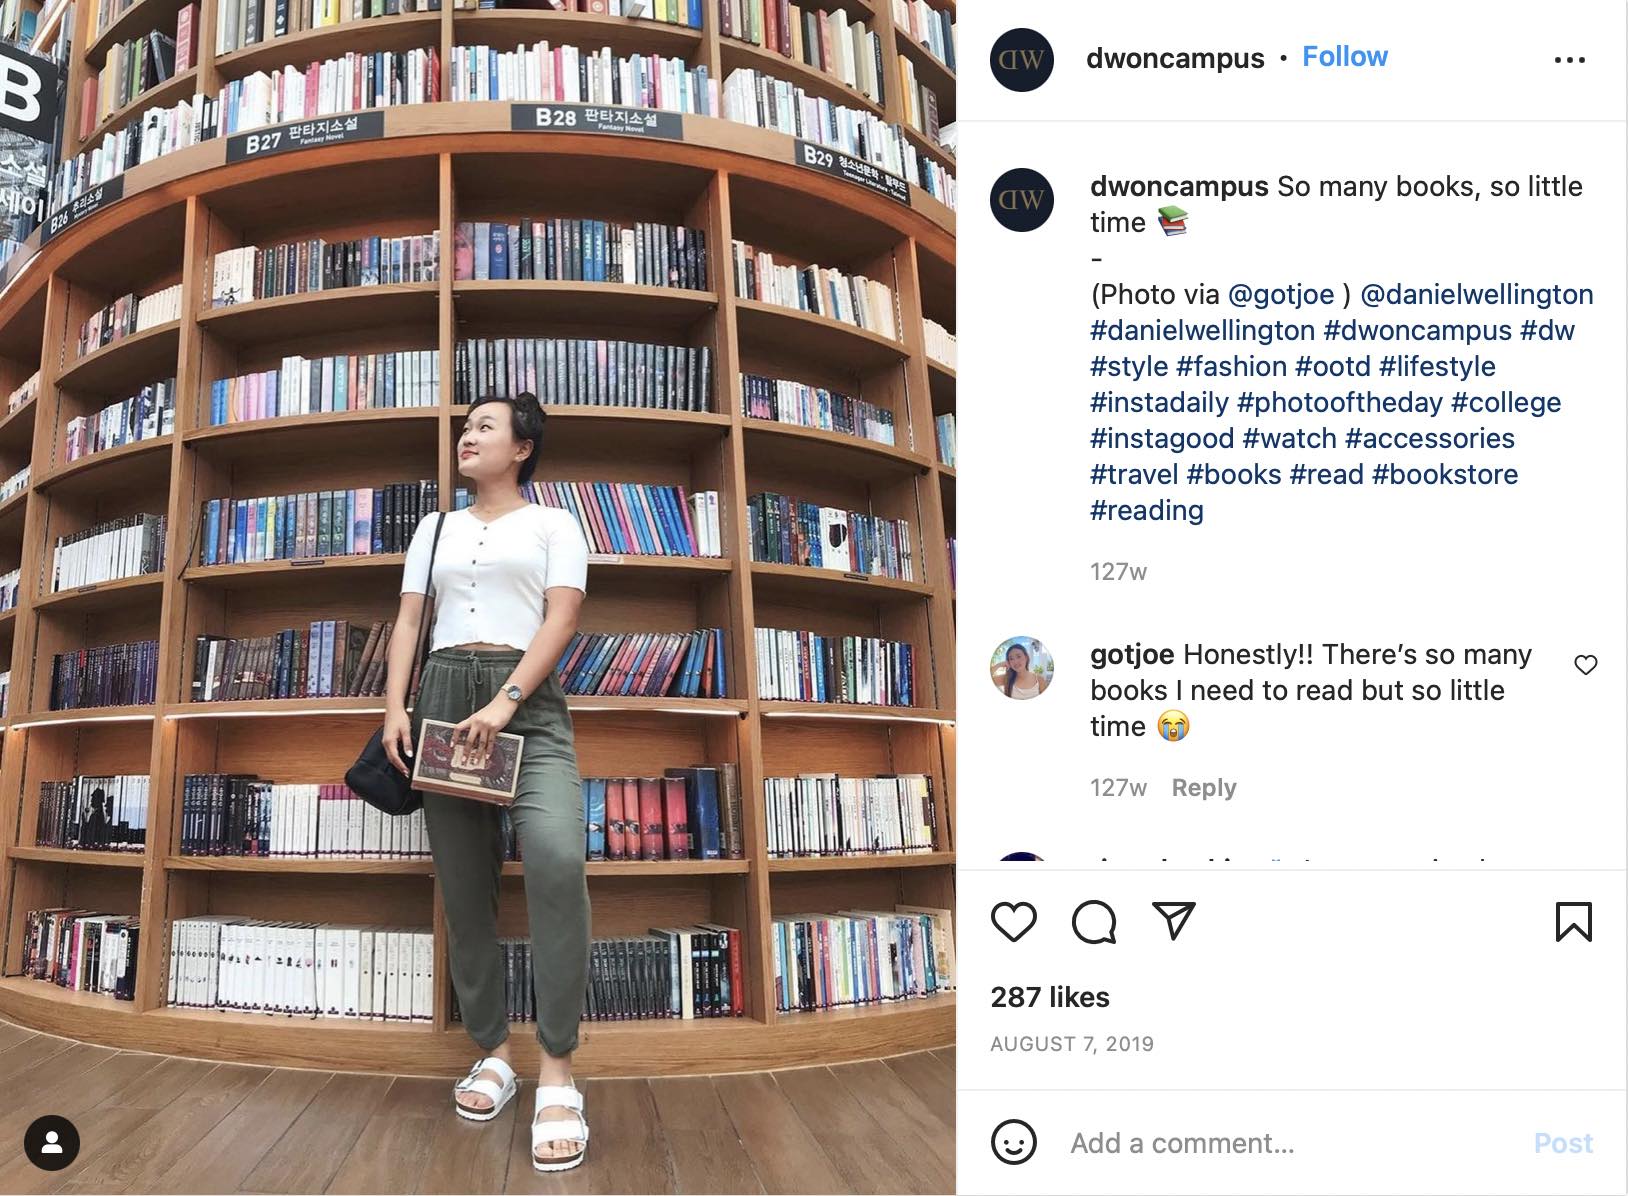 Photo of the Instagram campaign showing a female student in a library